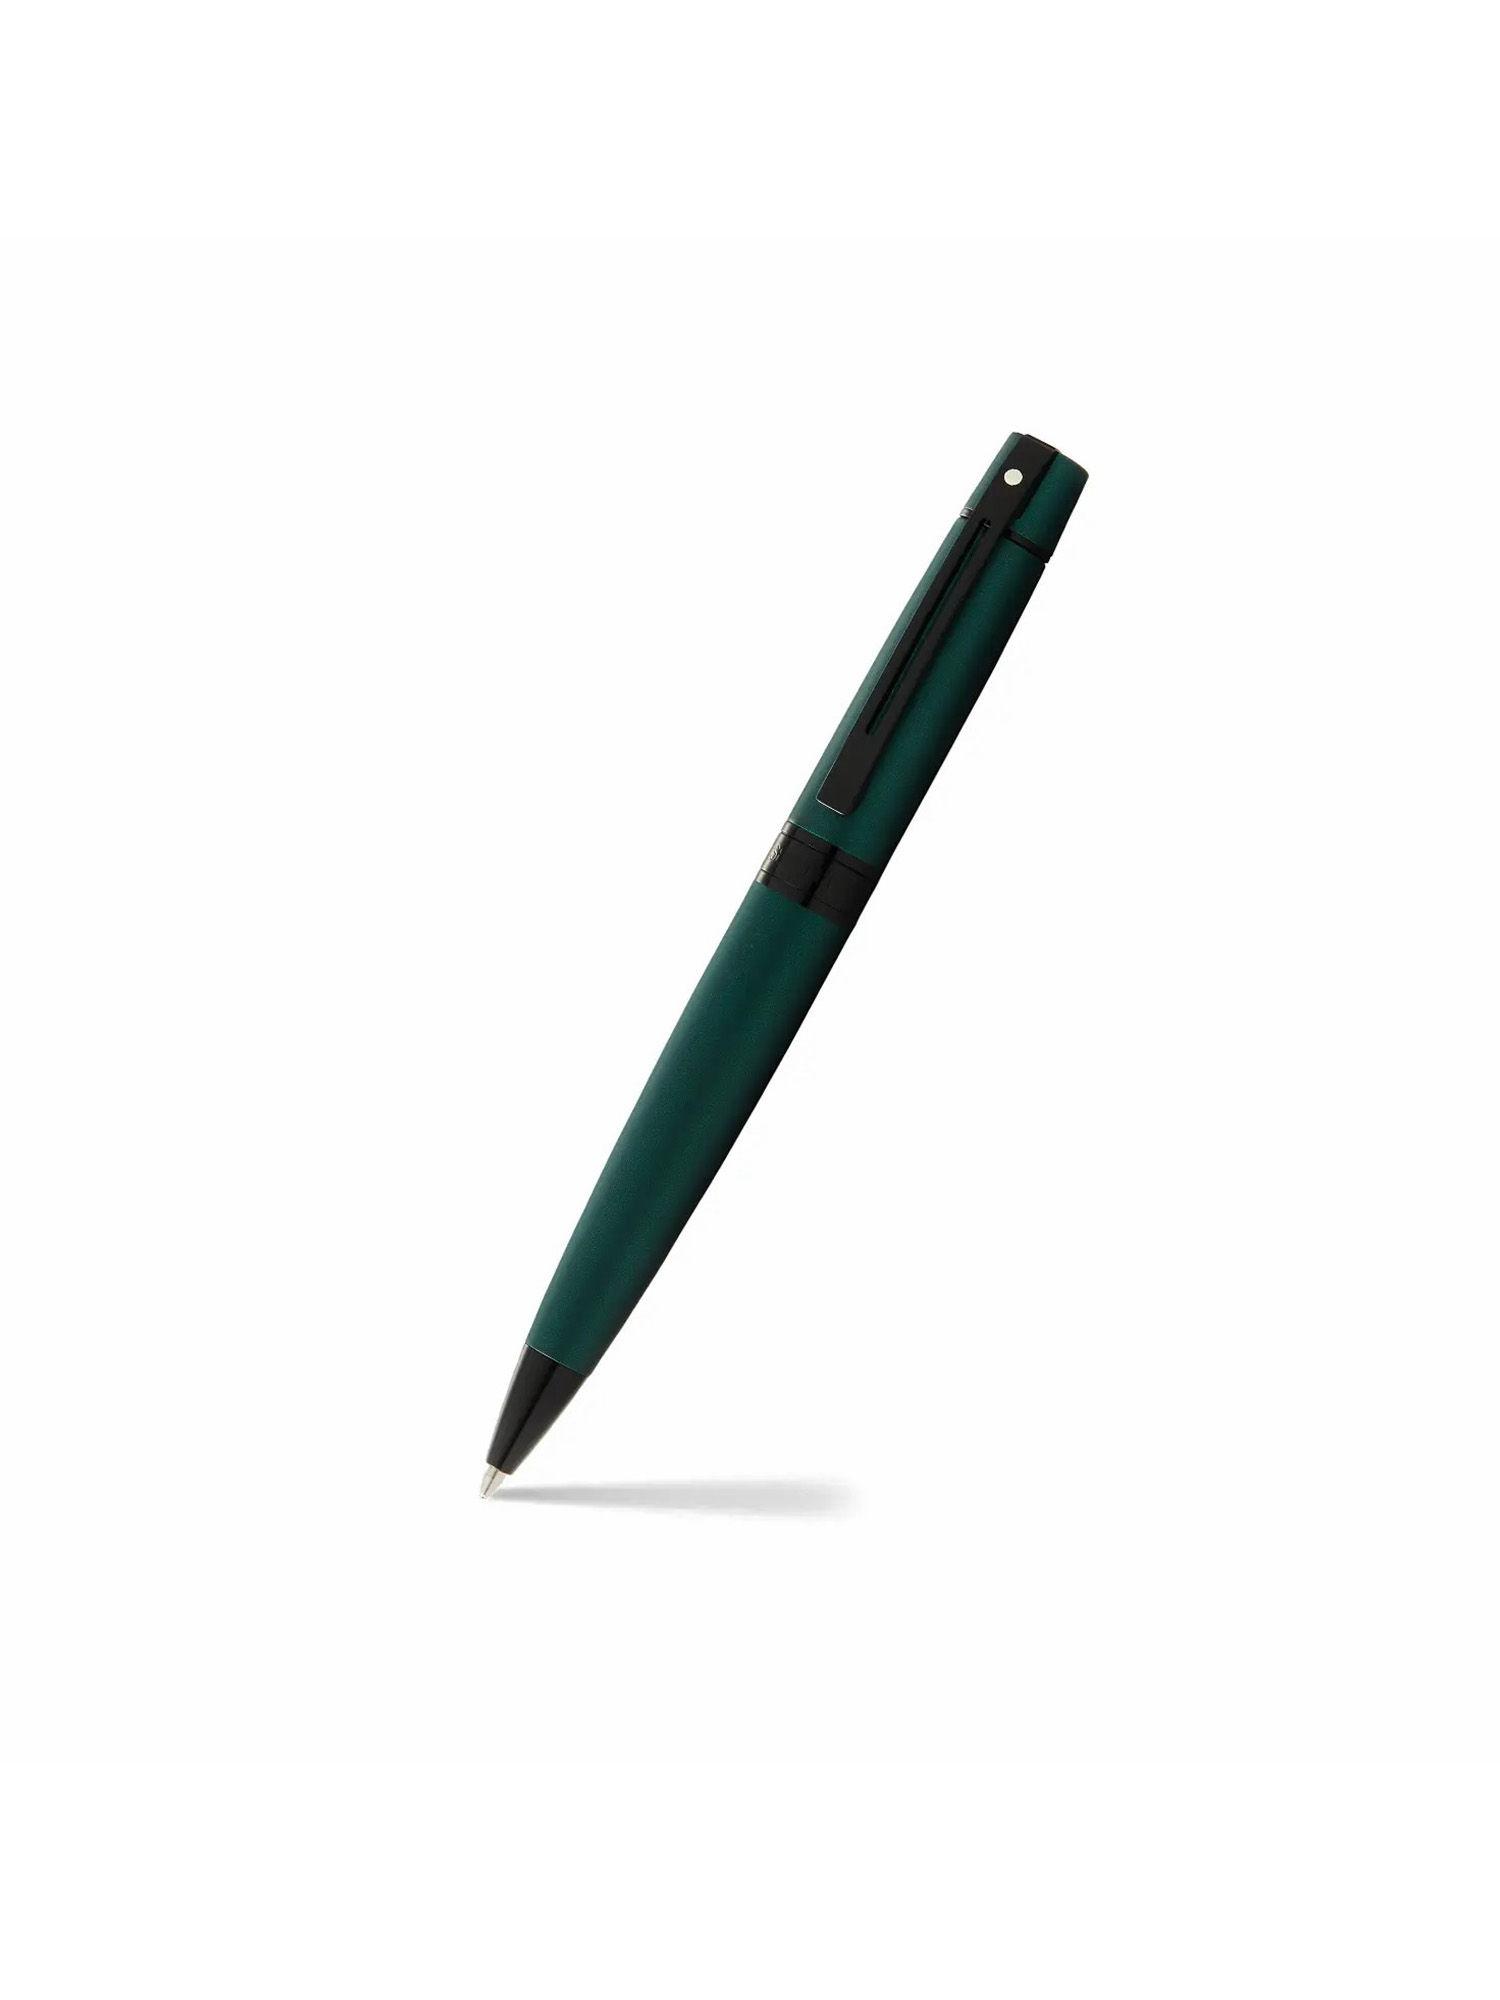 gift 300 lacquer ballpoint pen – matte green with polished black trim